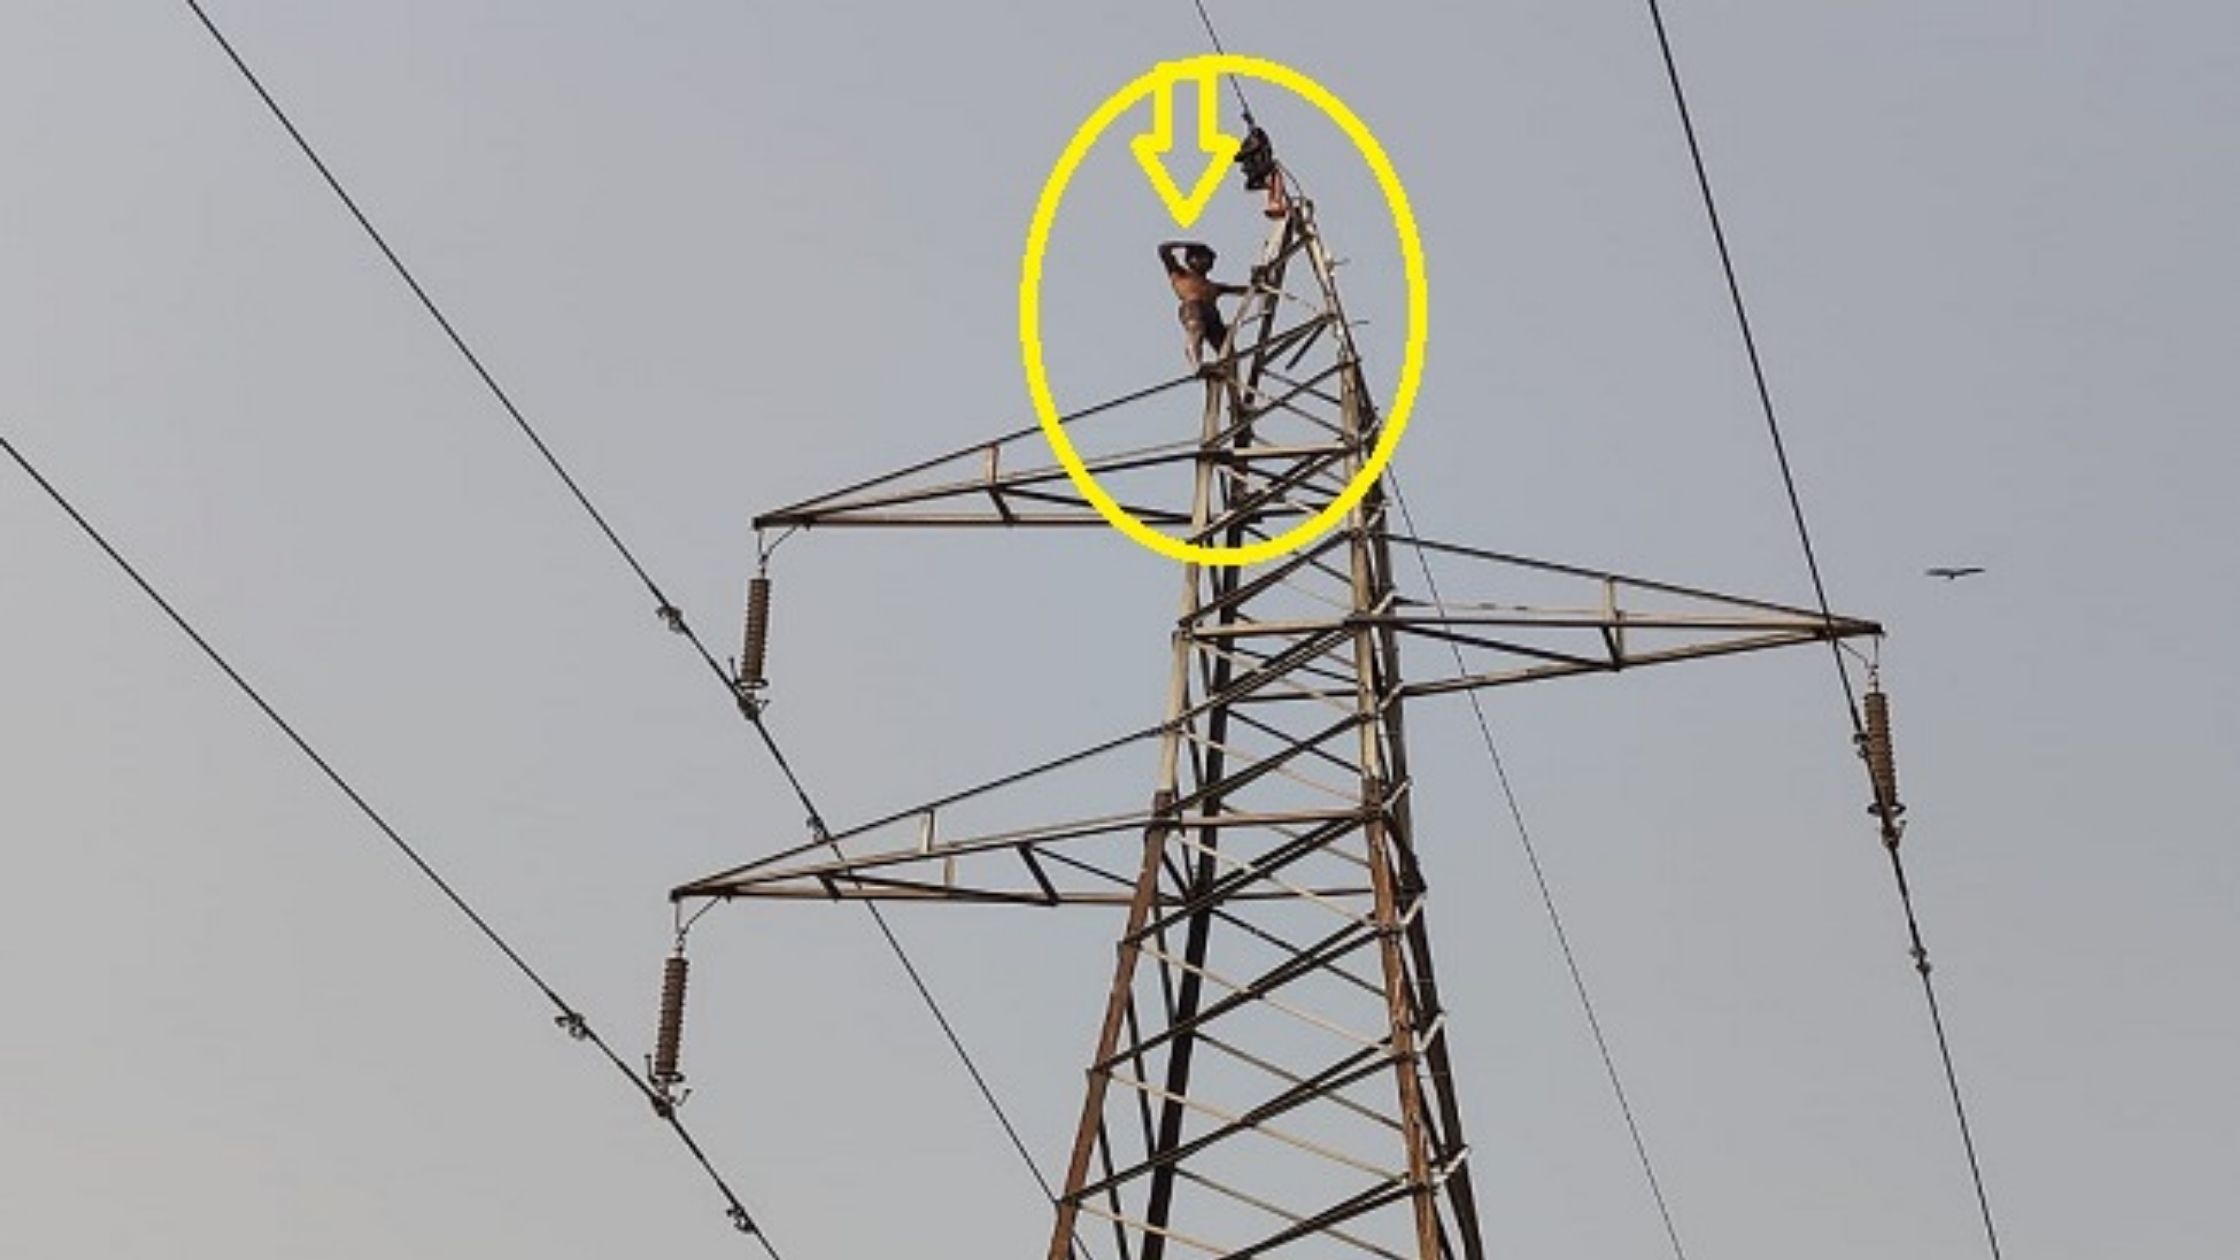 Youth climbing power transmission tower for mobile and sweets